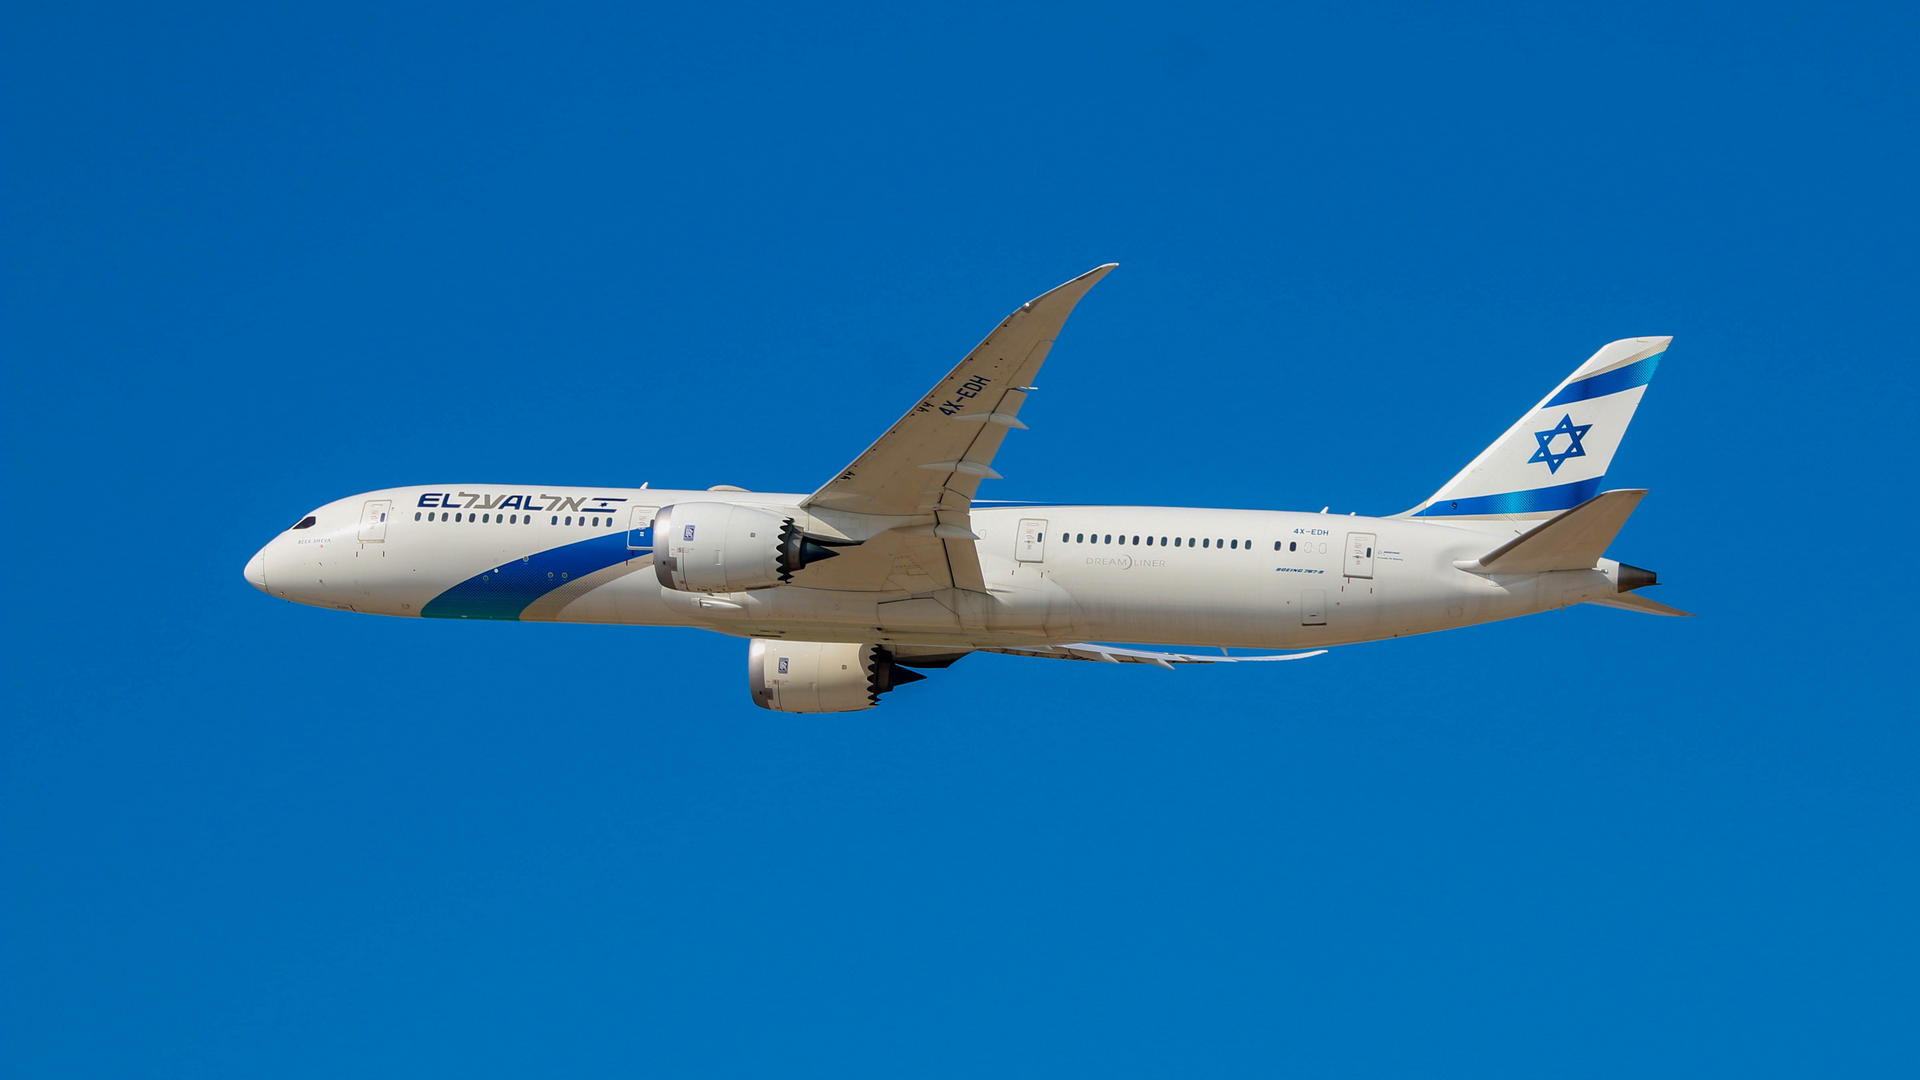 El Al In Talks To Buy Airbus Aircraft For The First Time